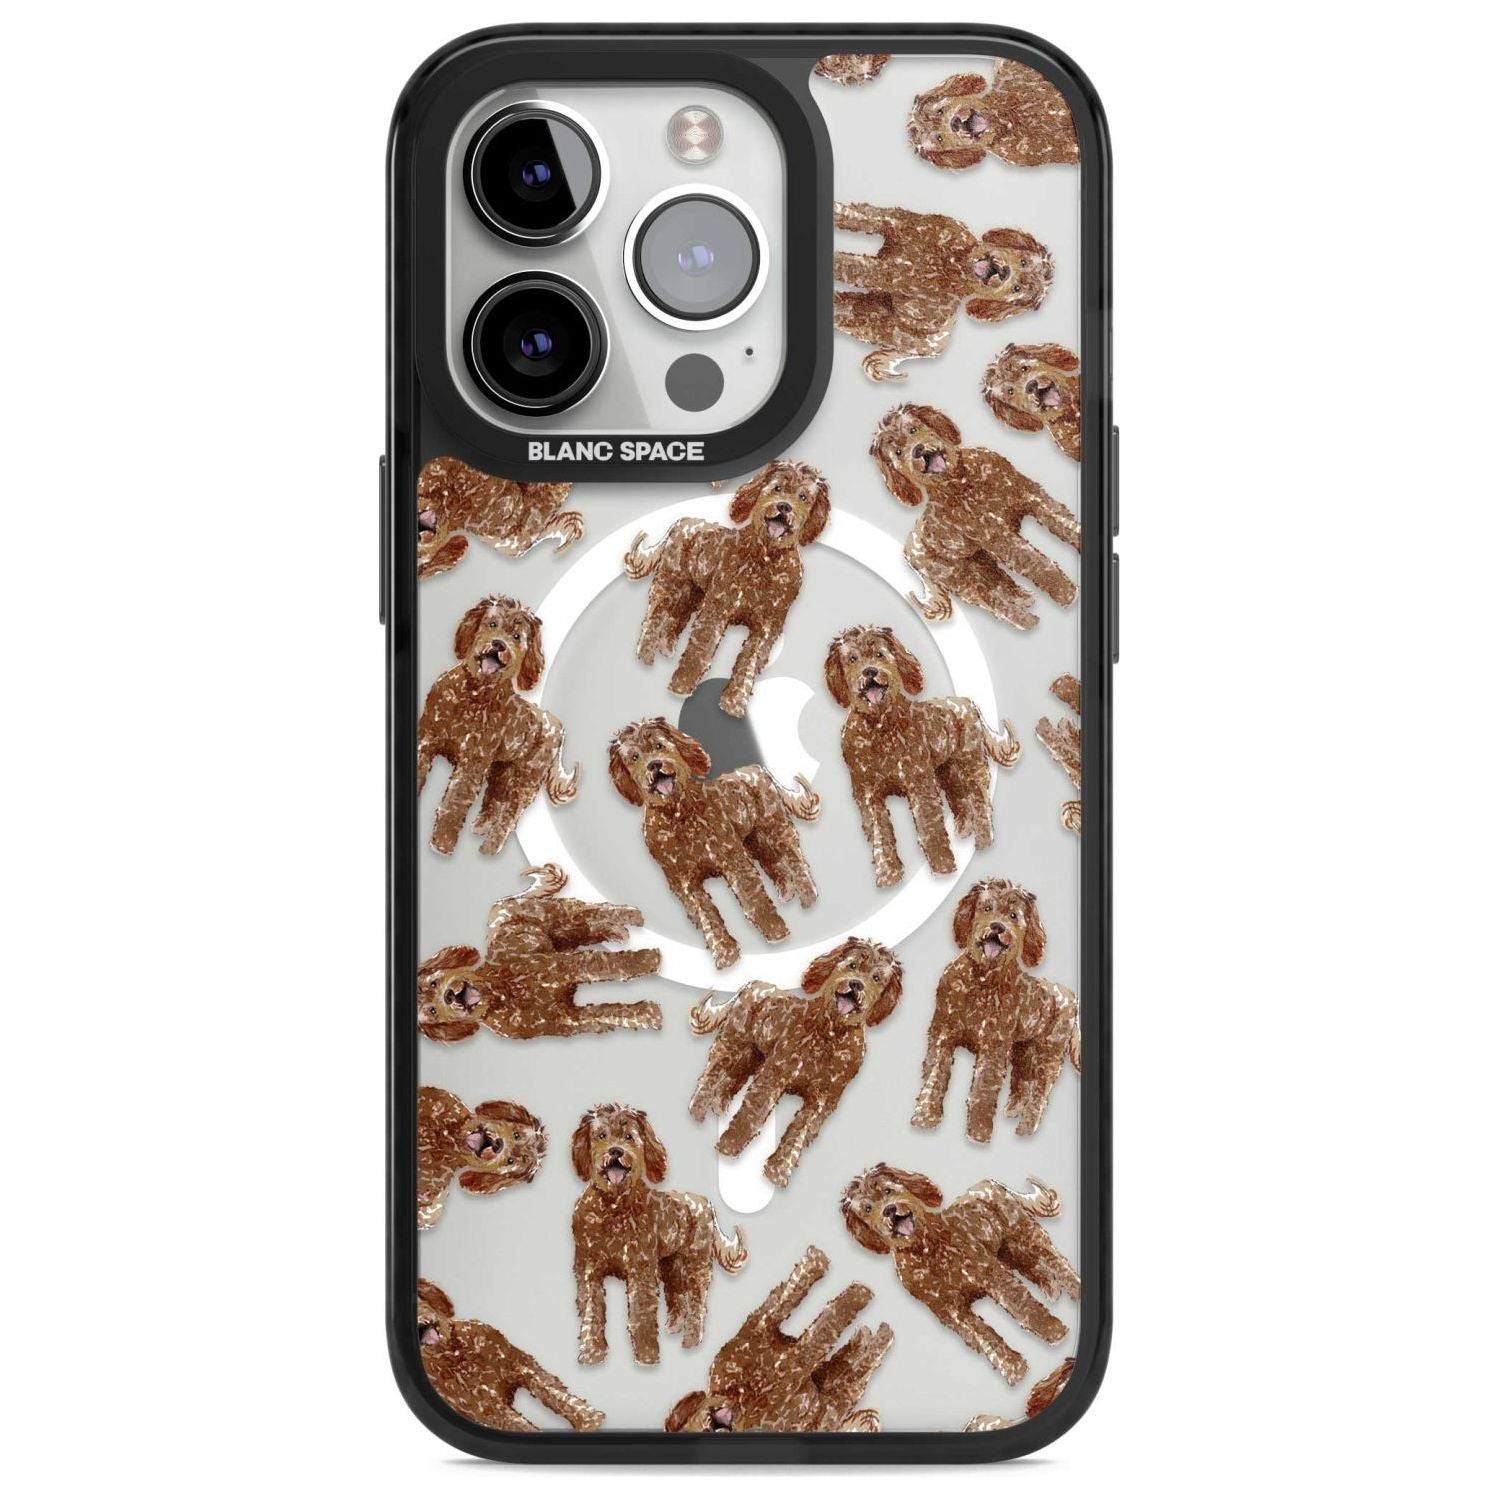 Labradoodle (Brown) Watercolour Dog Pattern Phone Case iPhone 15 Pro Max / Magsafe Black Impact Case,iPhone 15 Pro / Magsafe Black Impact Case,iPhone 14 Pro Max / Magsafe Black Impact Case,iPhone 14 Pro / Magsafe Black Impact Case,iPhone 13 Pro / Magsafe Black Impact Case Blanc Space